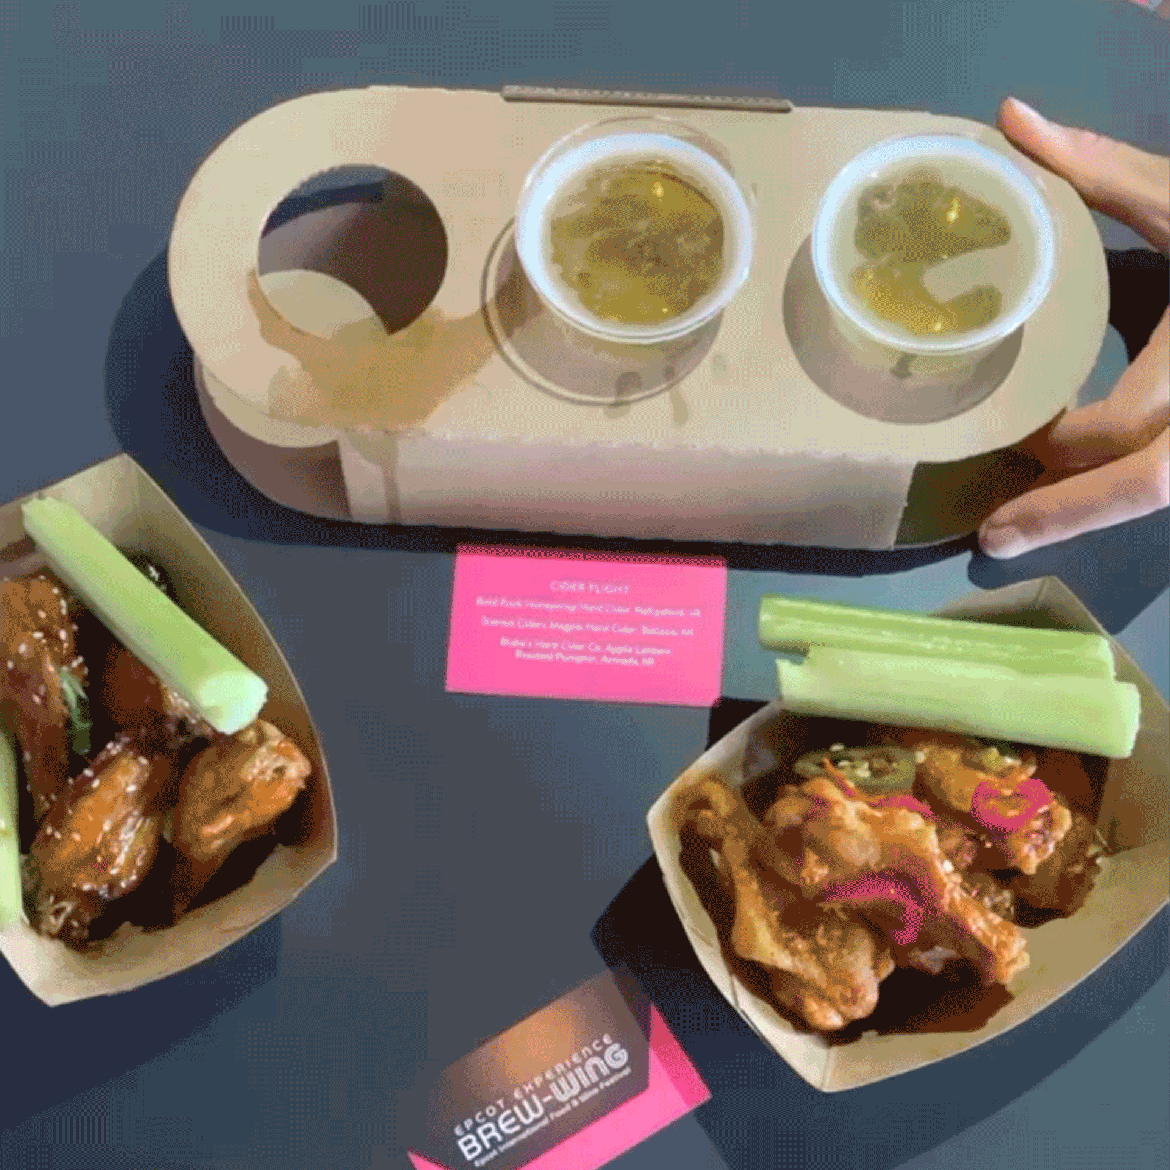 A hand reaches for a small, plastic cup of beer from a cardboard flight container surrounded by hot wings.